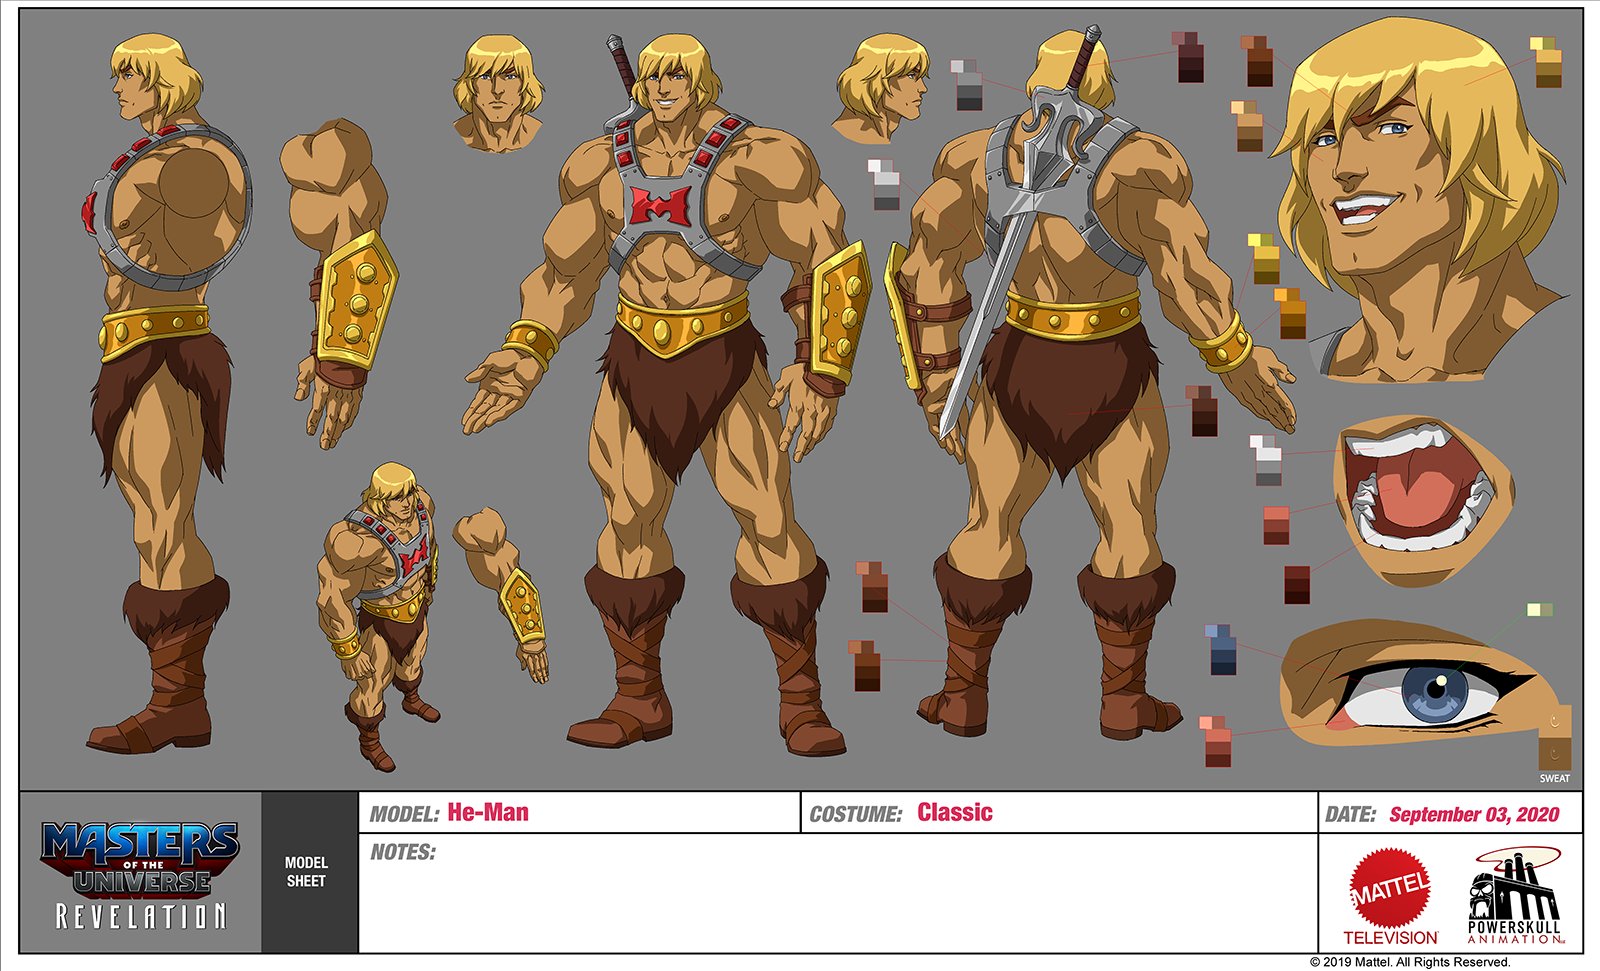 The Heroes! Powerhouse Animation shares design models for Masters of the Universe: Revelation.